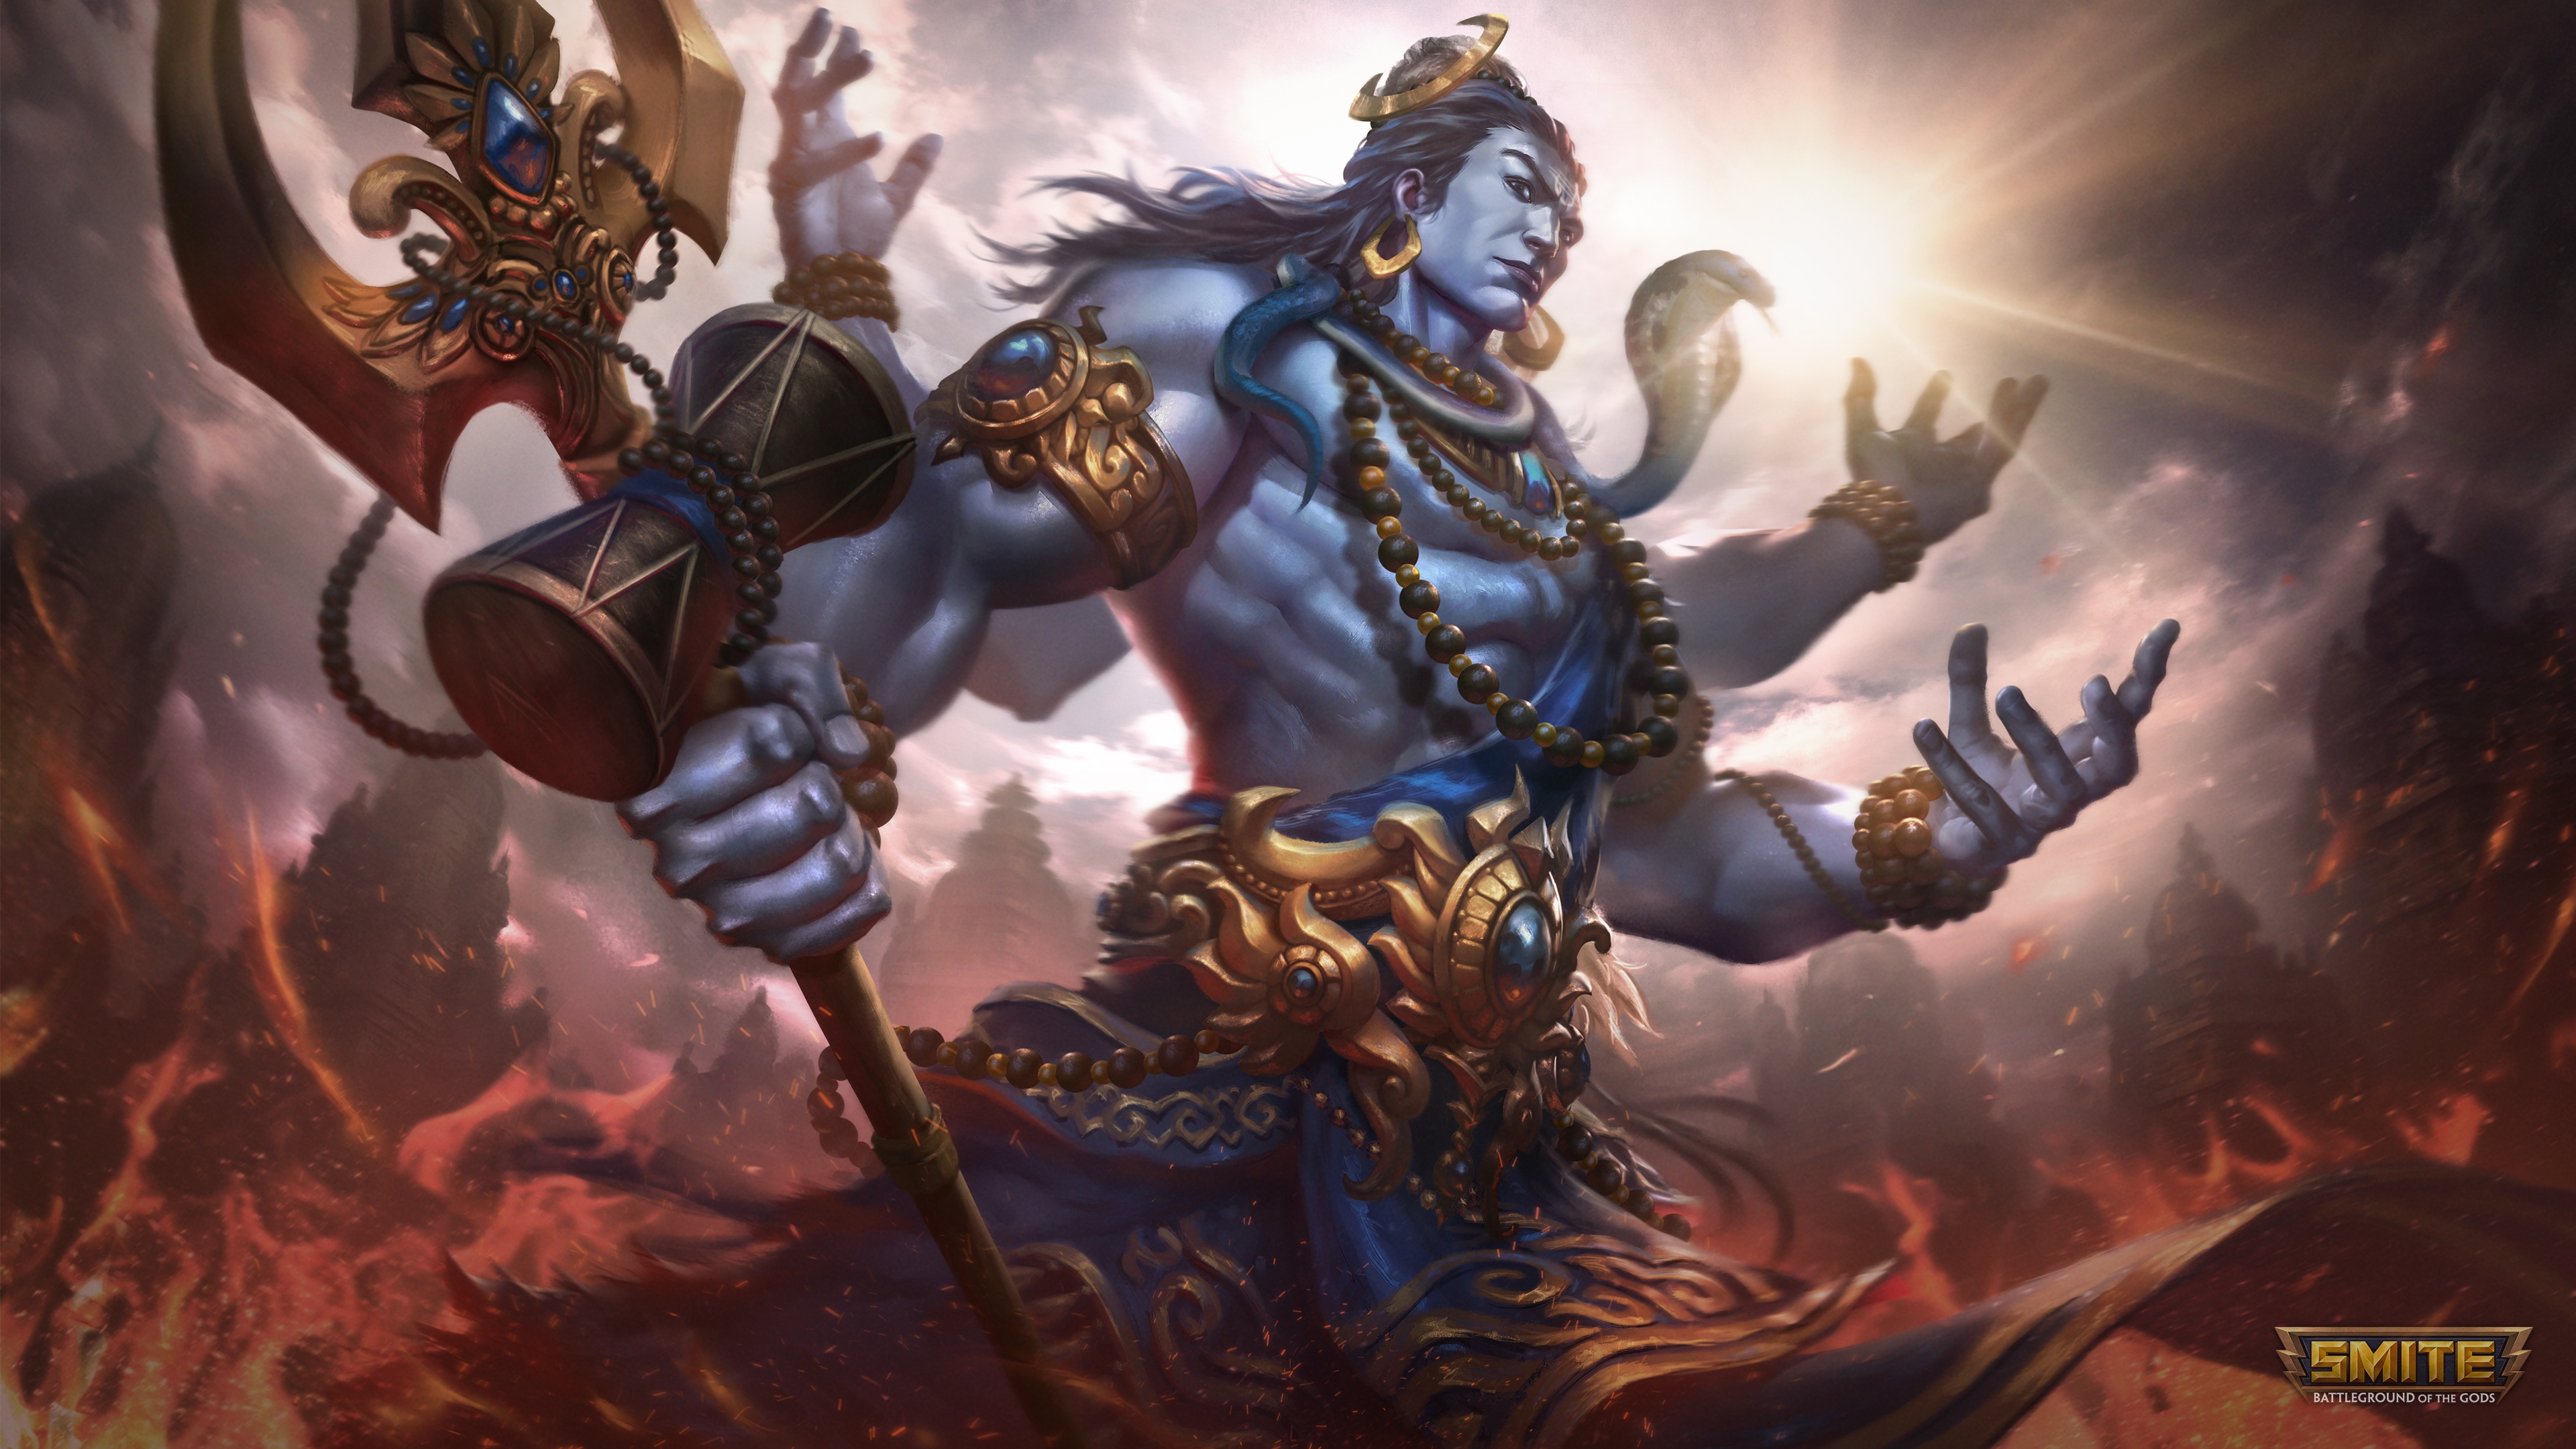 HD wallpaper, Lord Shiva, The Destroyer, 2022 Games, Smite